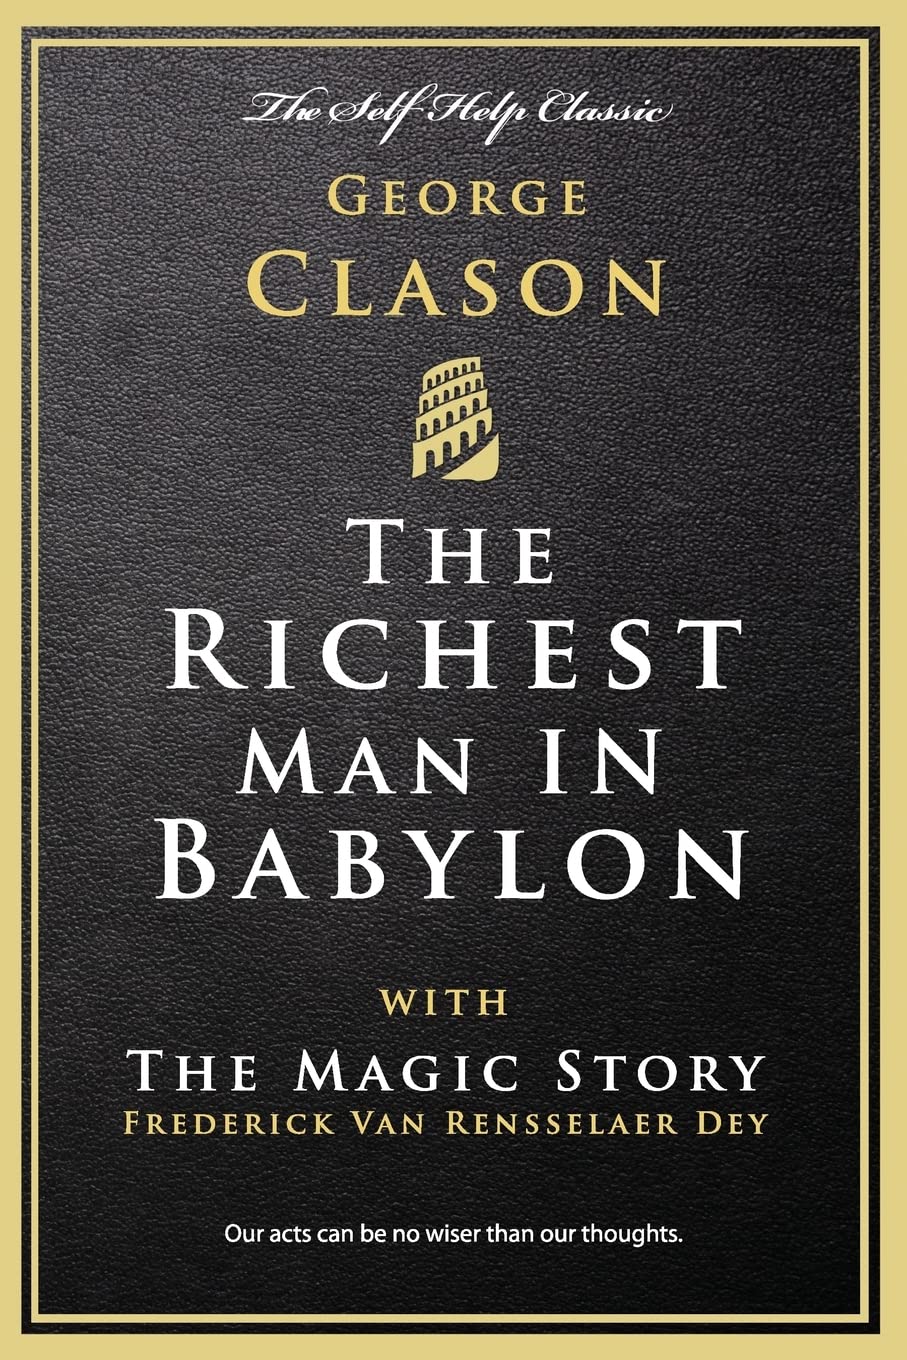 The Richest Man in Babylon: with The Magic Story SureShot Books